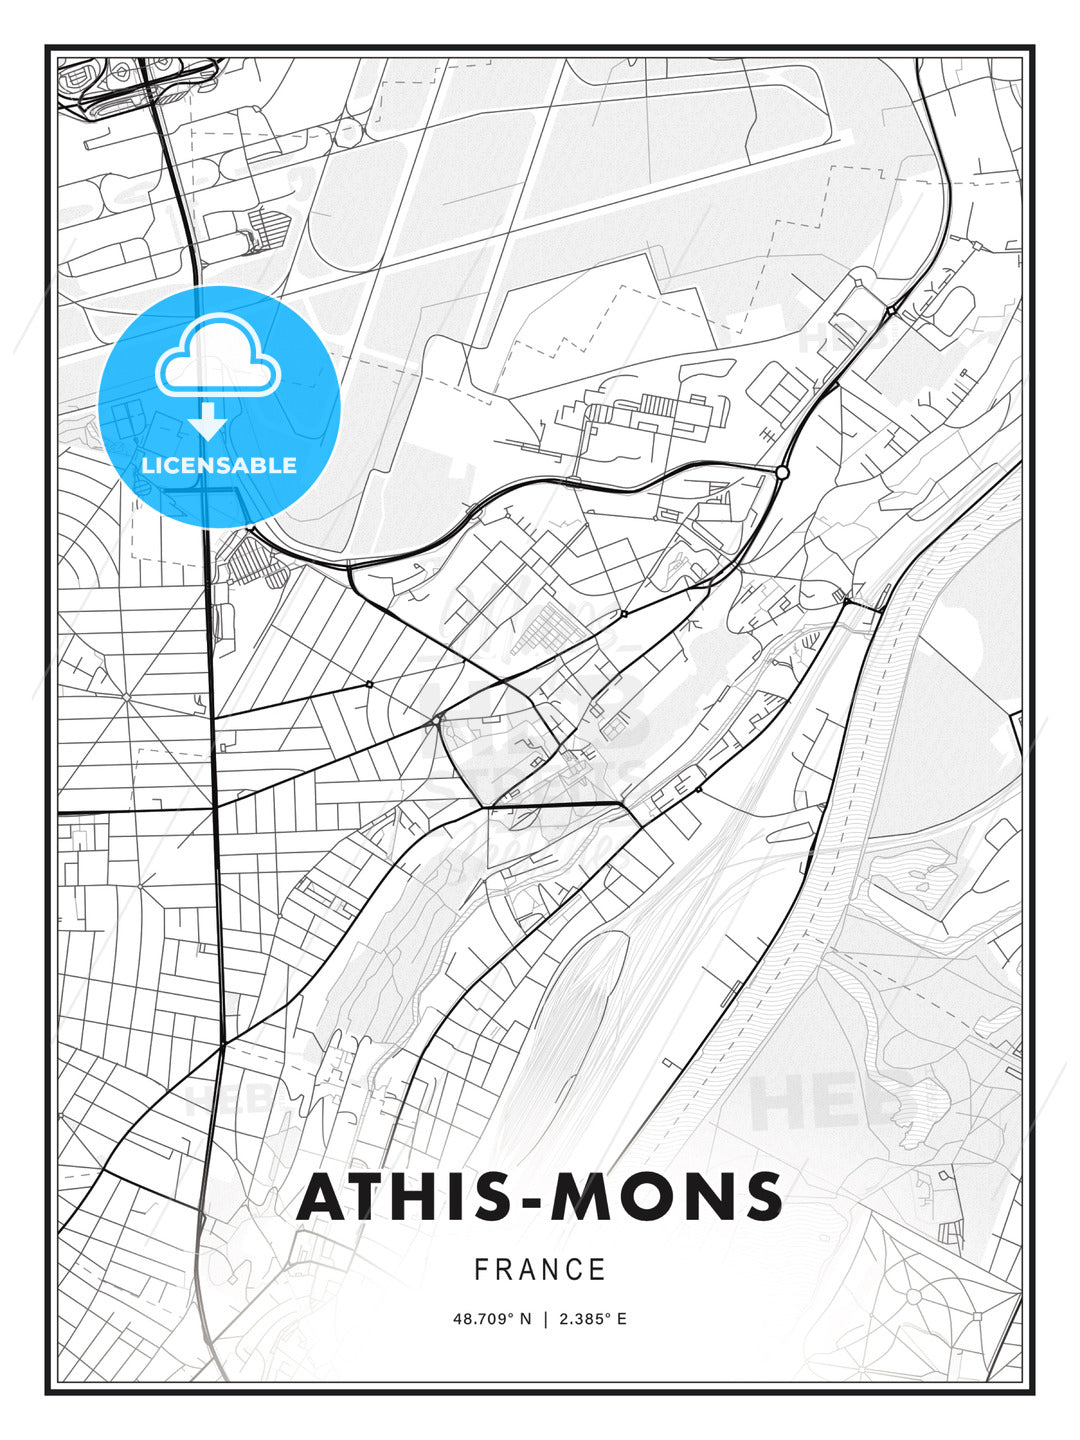 Athis-Mons, France, Modern Print Template in Various Formats - HEBSTREITS Sketches